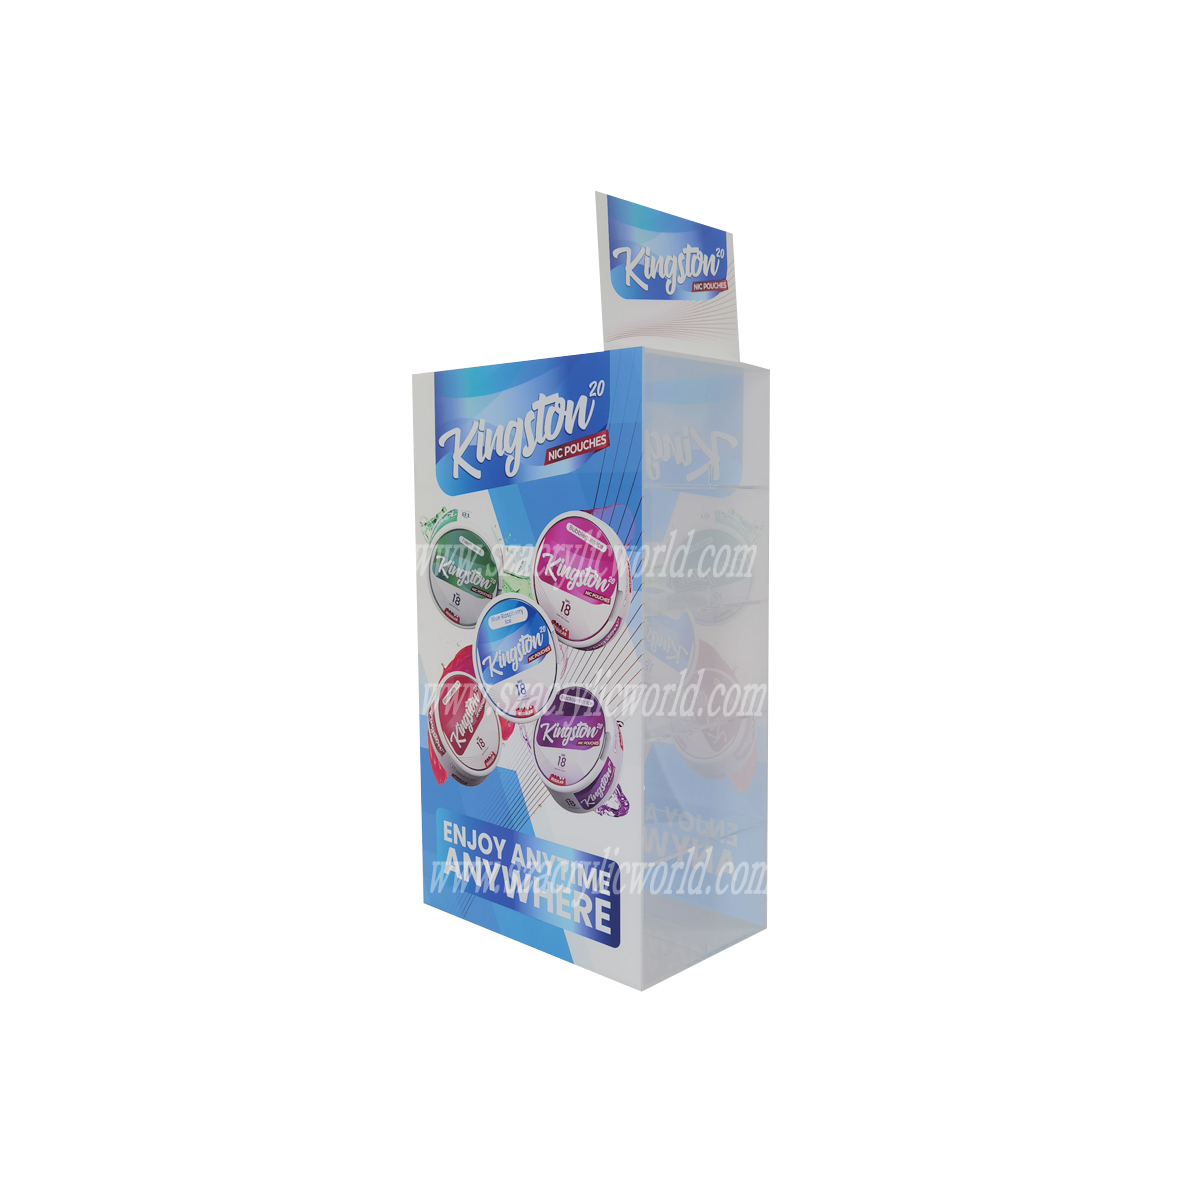 Acrylic Nicotine pouches display stand manufacture supplier